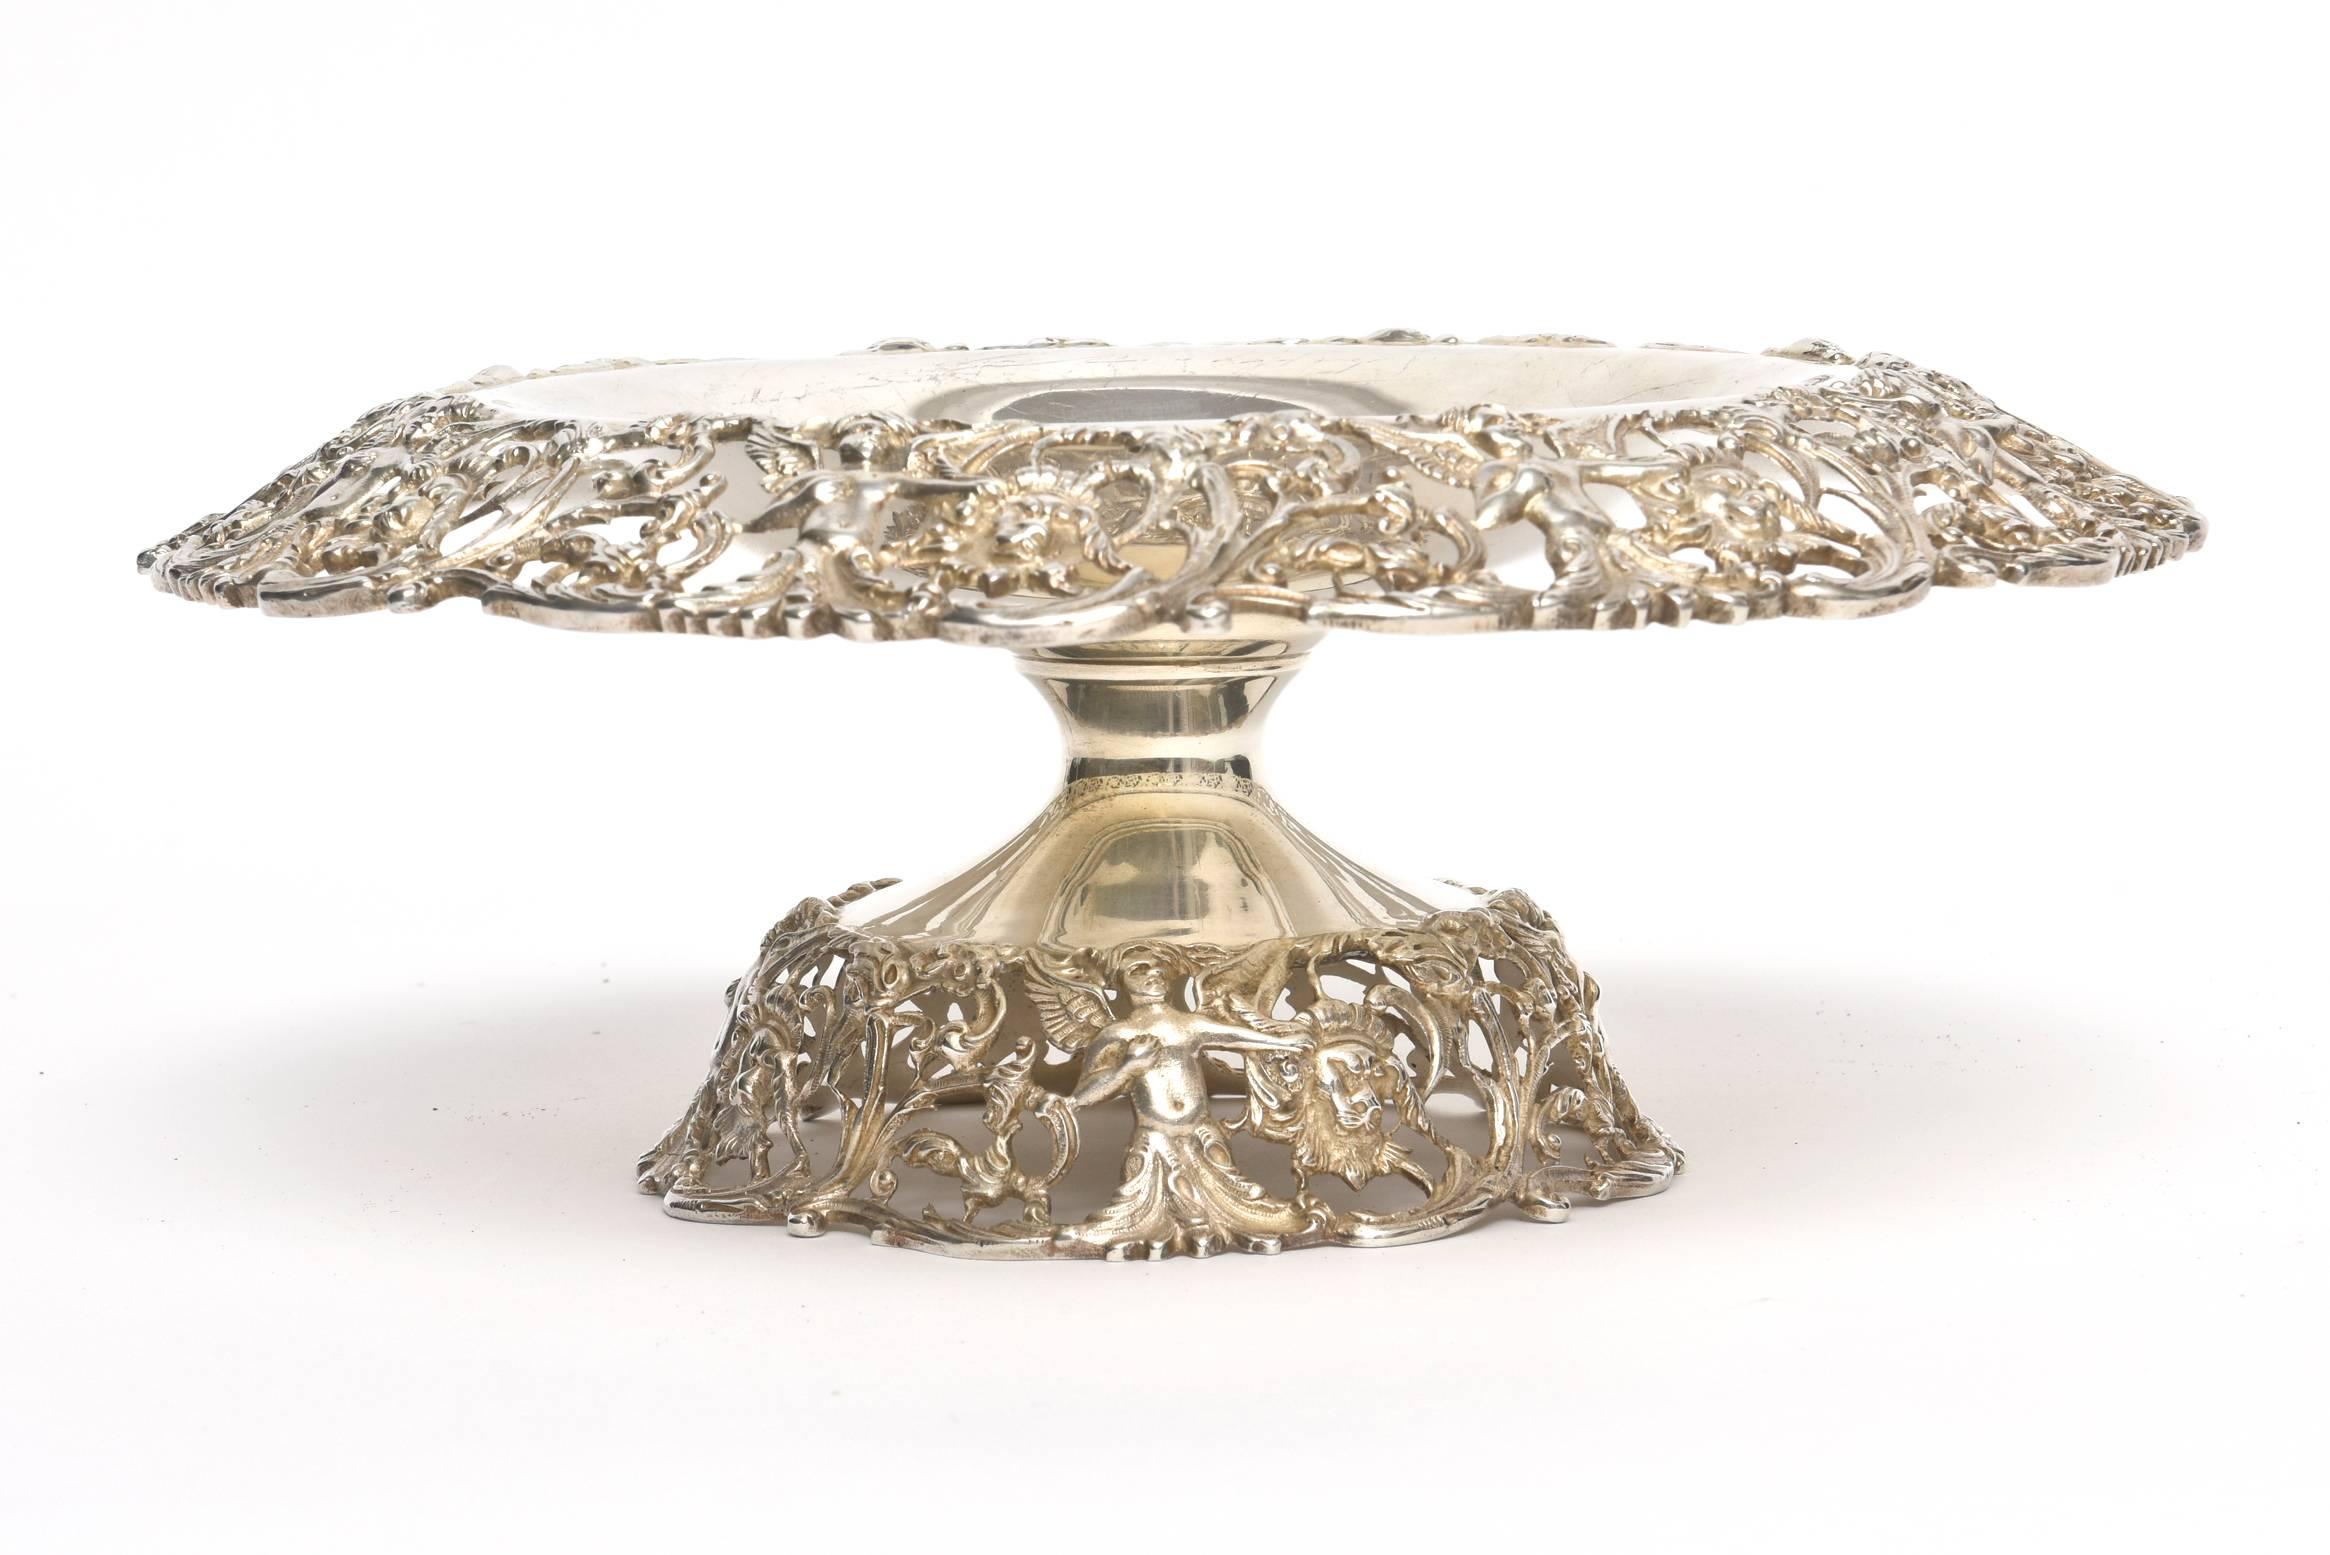 Mid 20th Century American sterling silver reticulated compote by Durham Silver Co. featuring a pierced edge and foot with a winged cherub and lion design.  This ornate compote features an everted top section with pierced putto busts and lion masques